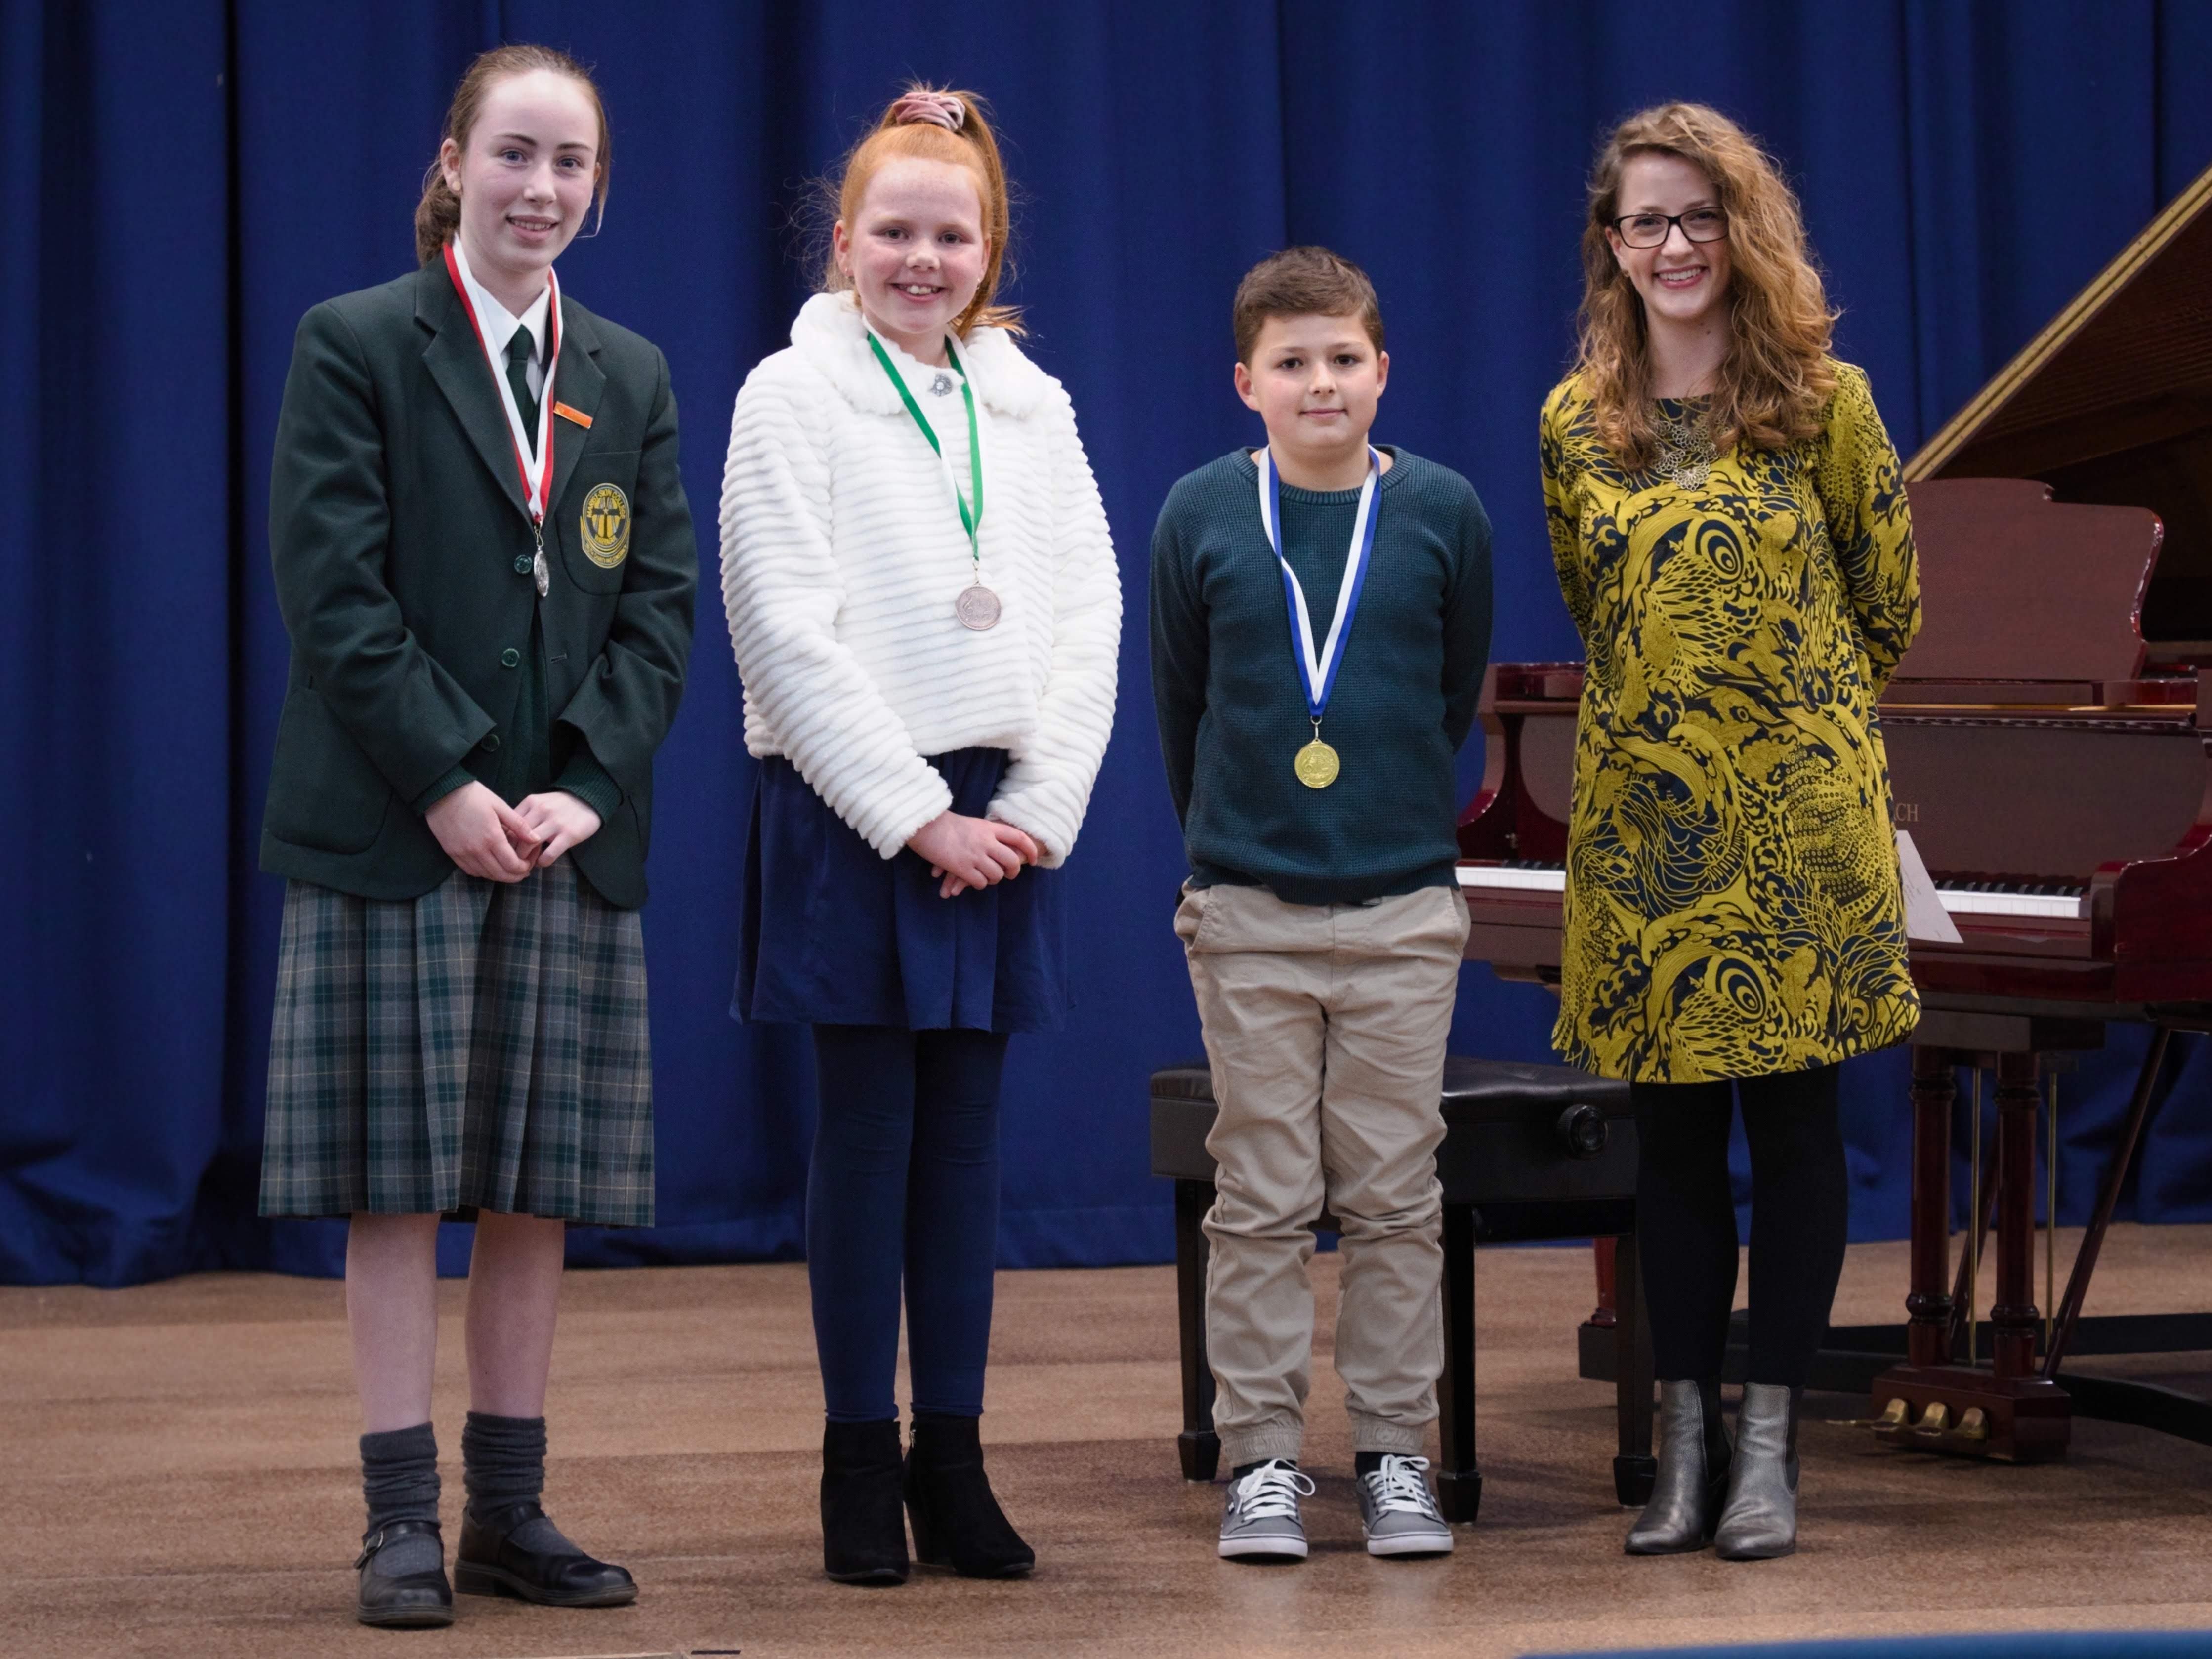 WGE Pianoforte Day 1 S.06a 1st Thomas Geary, 2nd Sienna Webster, 3rd Evangeline Marquis